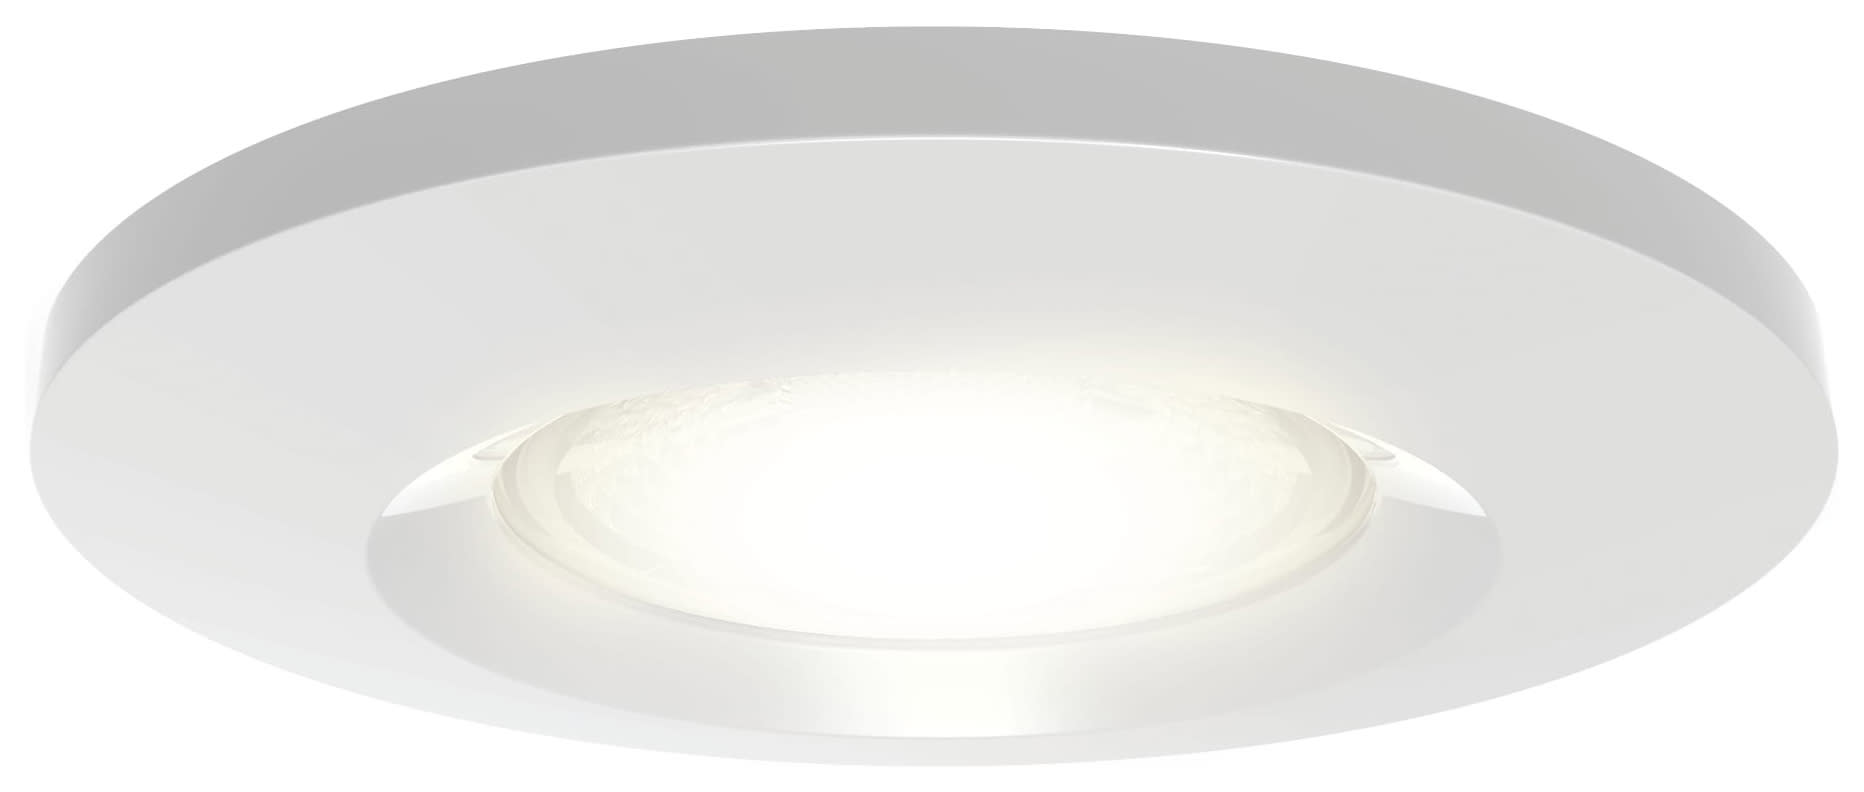 4Lite IP65 LED 3000K Fire Rated Downlight -